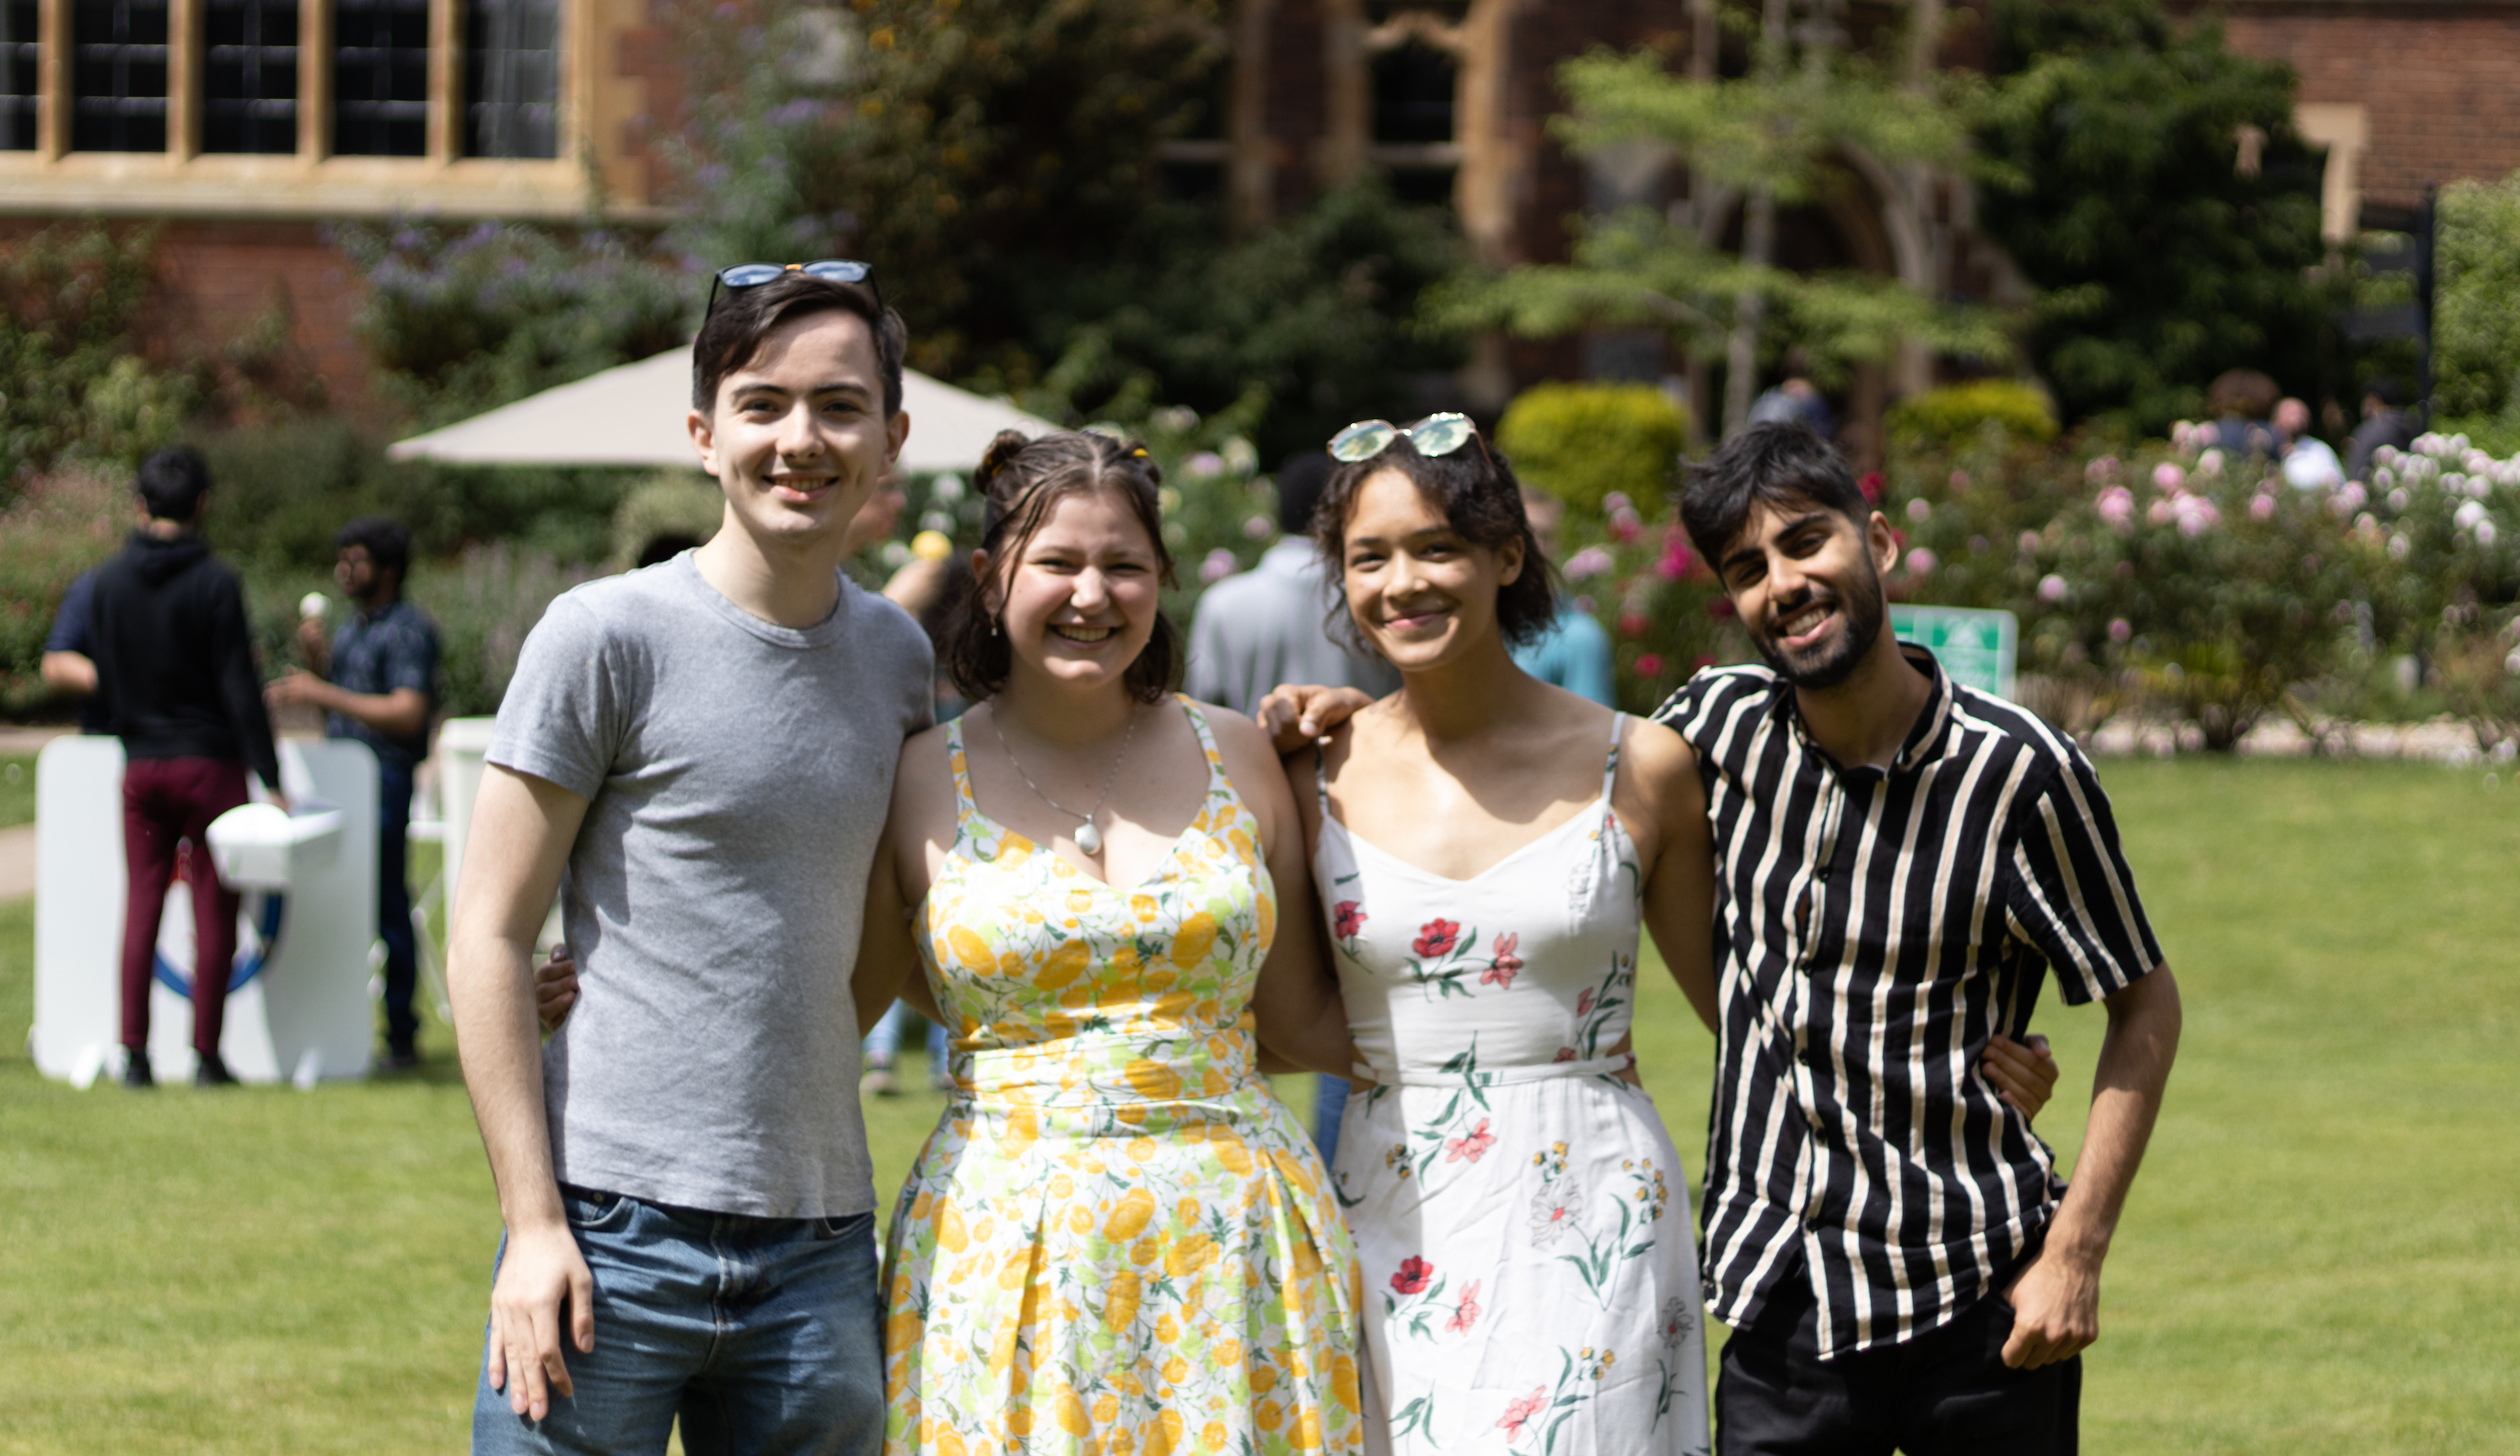 Students summer picnic in the Homerton grounds